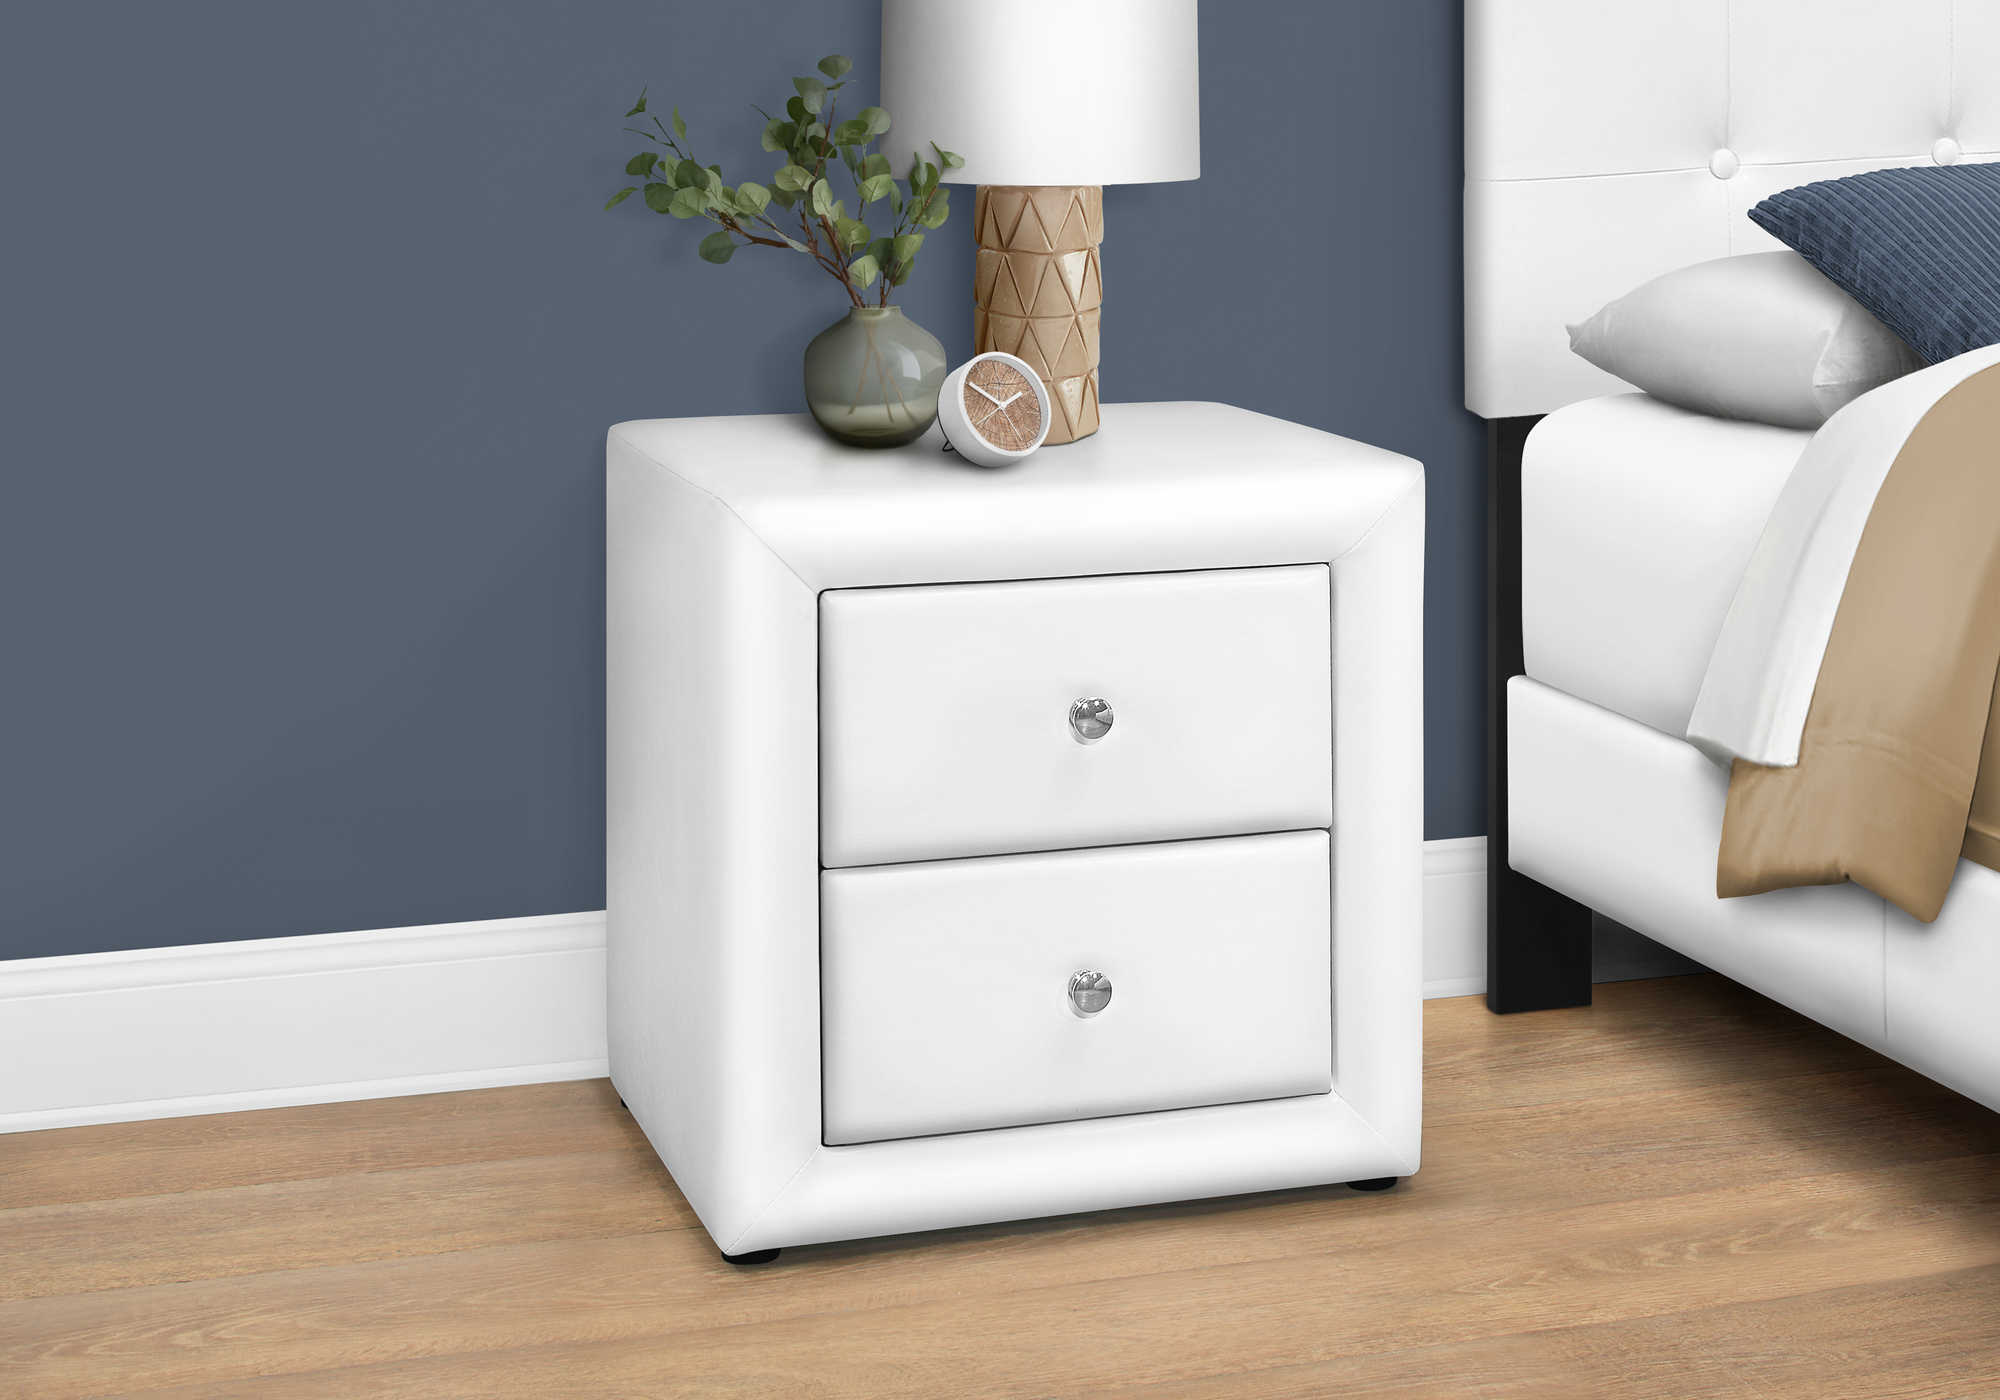 BEDROOM NIGHTSTAND - 21"H / WHITE LEATHER-LOOK 